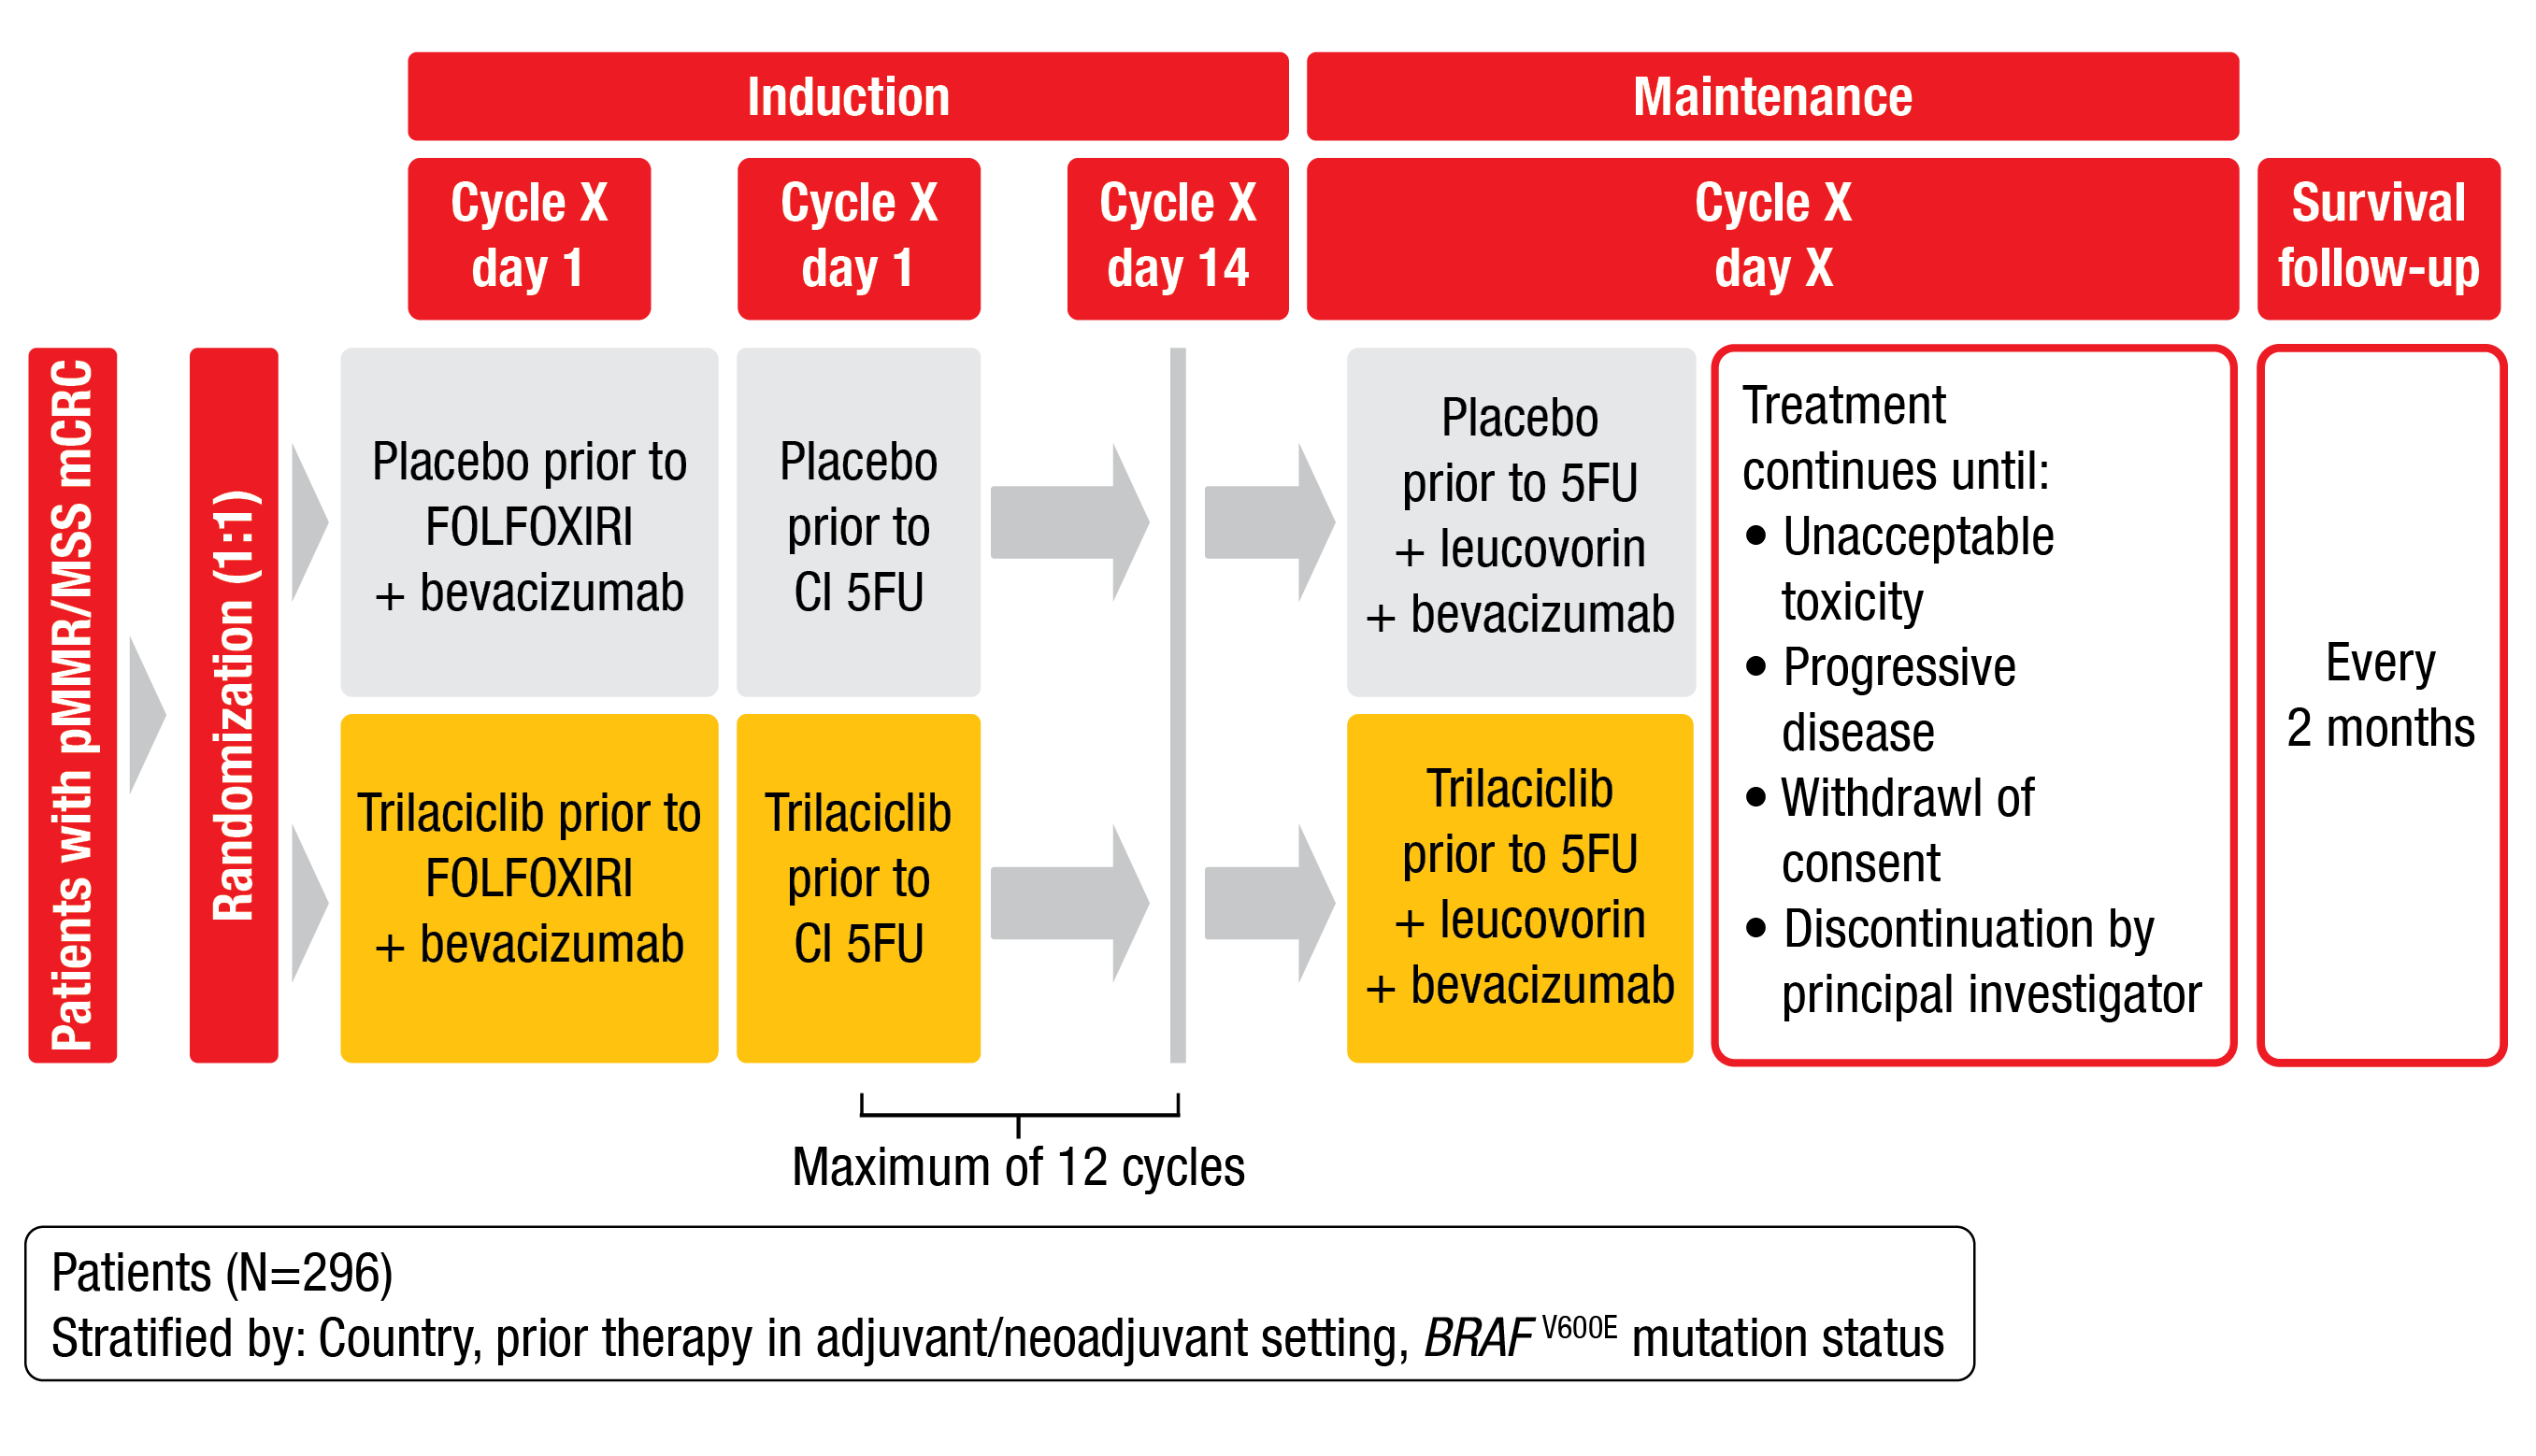 Figure 3: Study design of the phase III PRESERVE 1 trial.